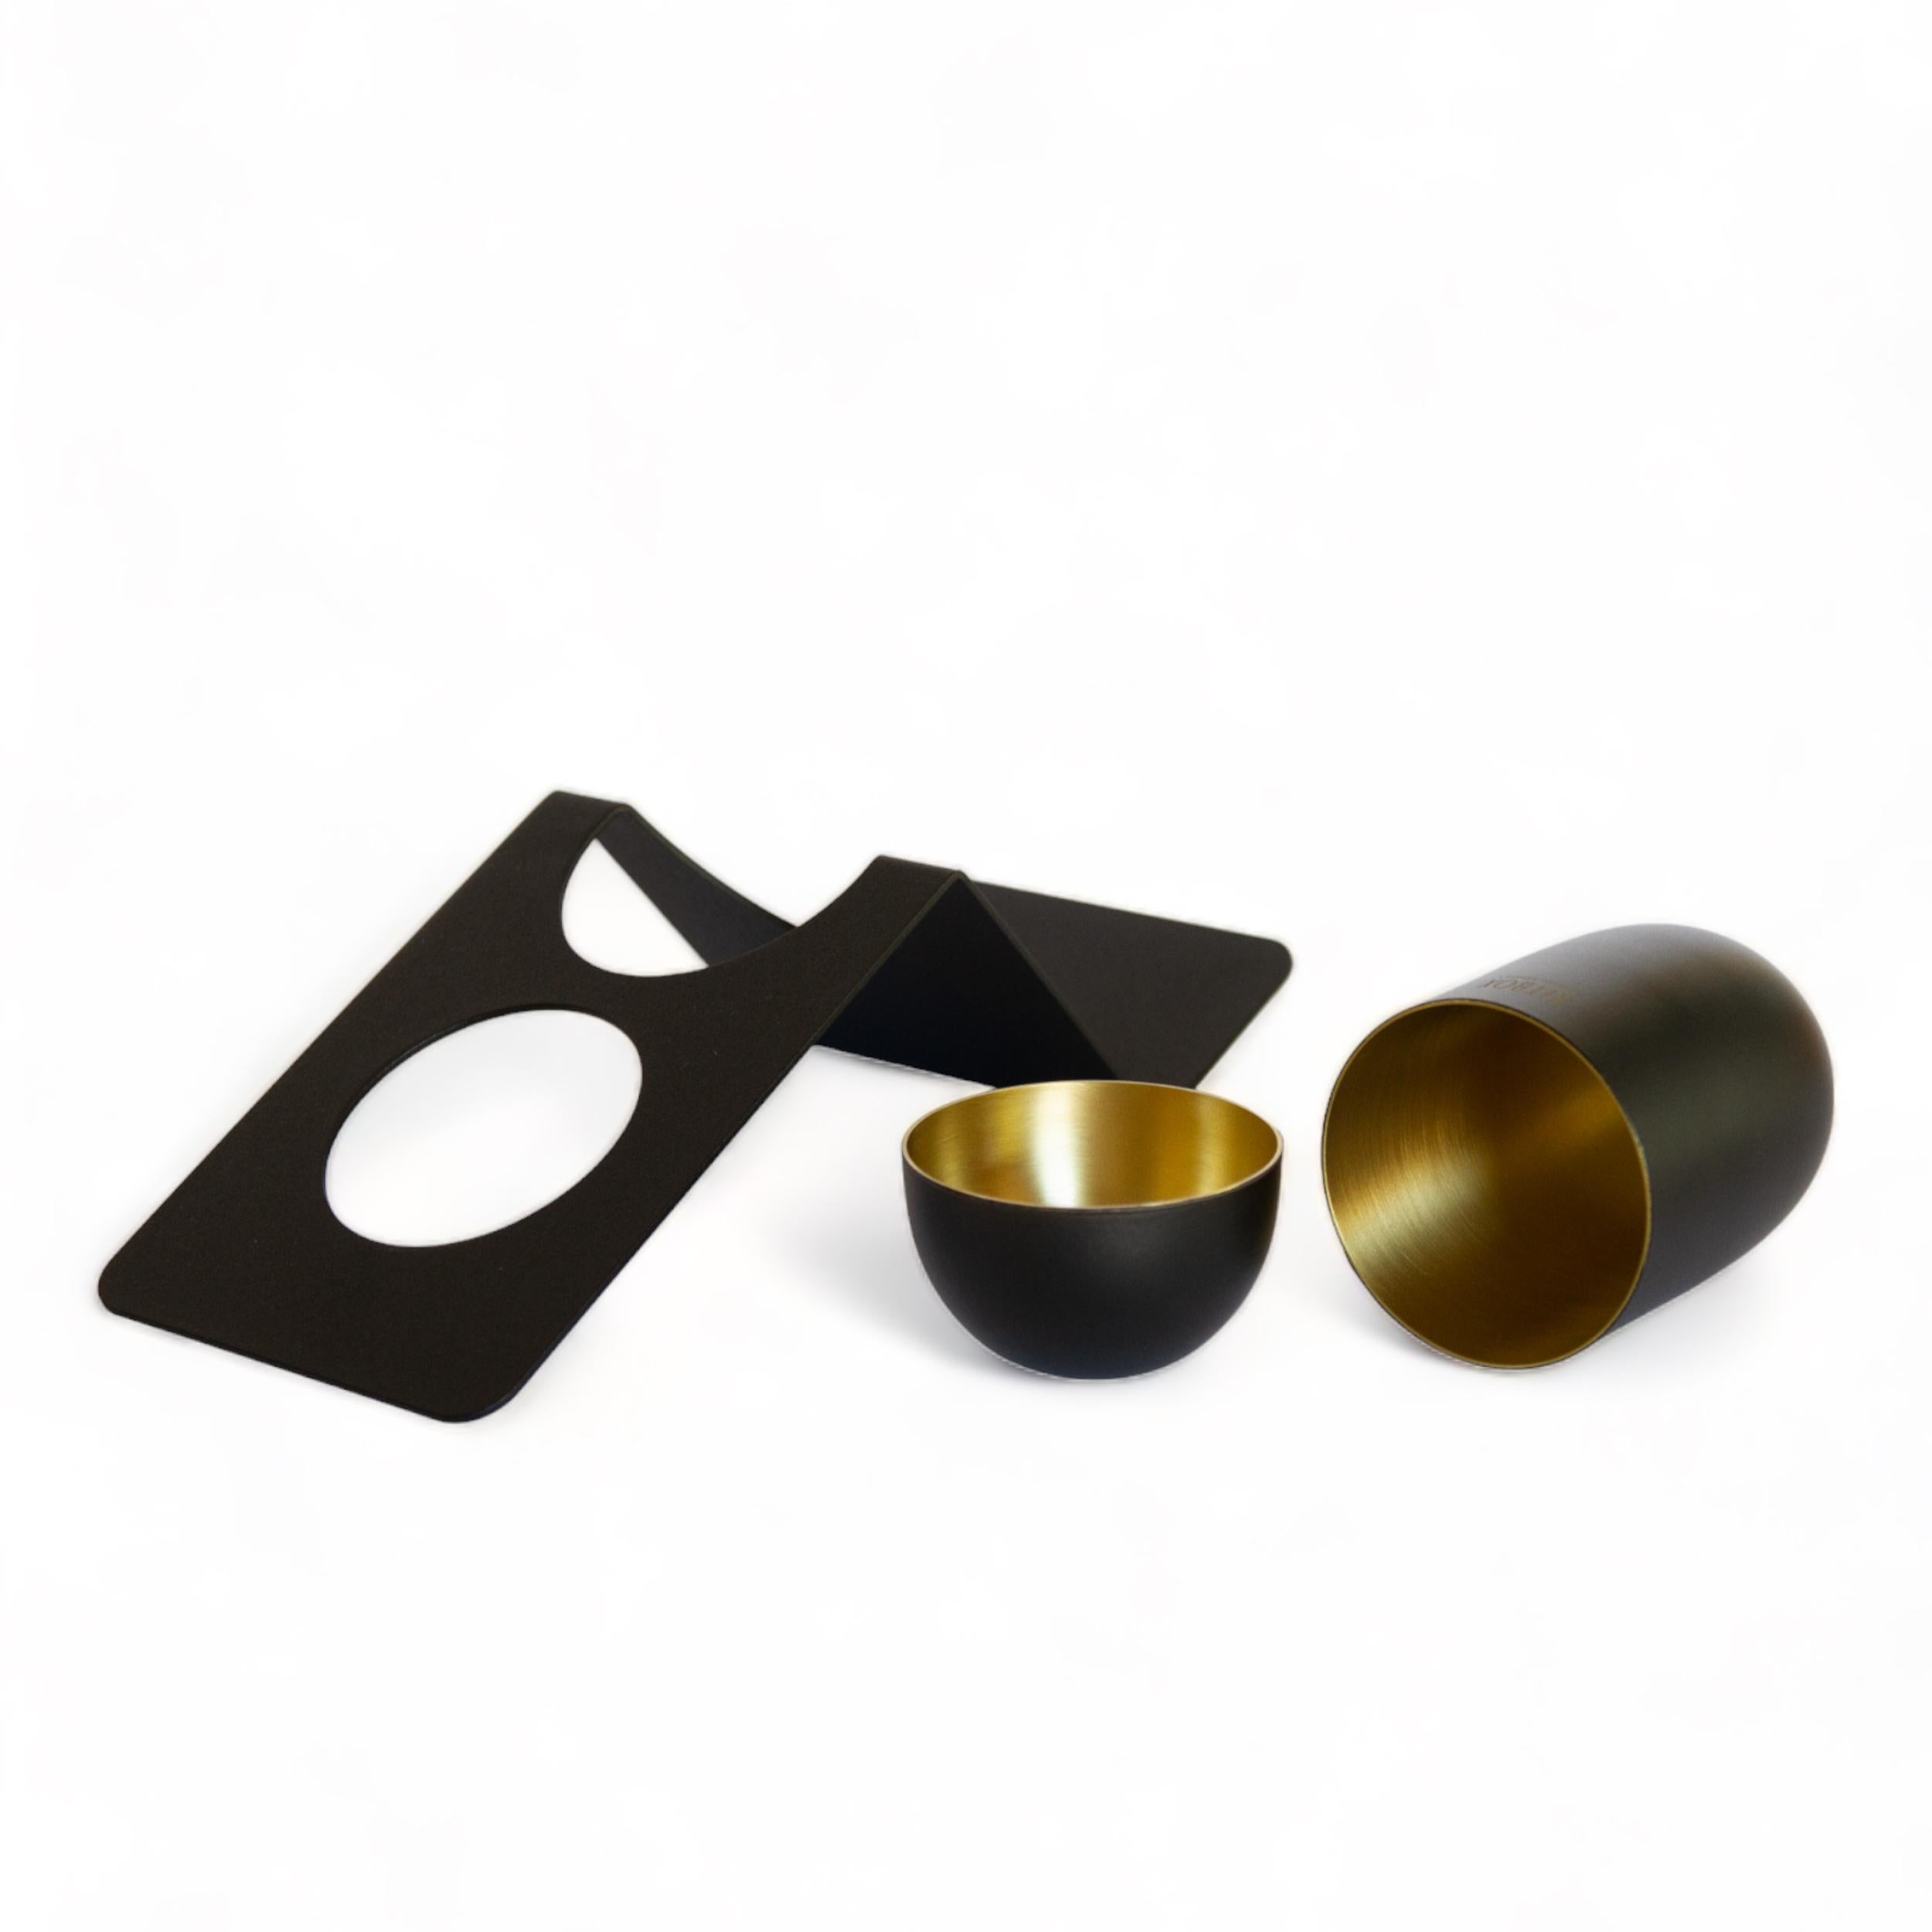 Blank Desk Organizer In Matte Black Coated Brass, Noir Edition, In Stock In New Condition For Sale In Mugla, Bodrum